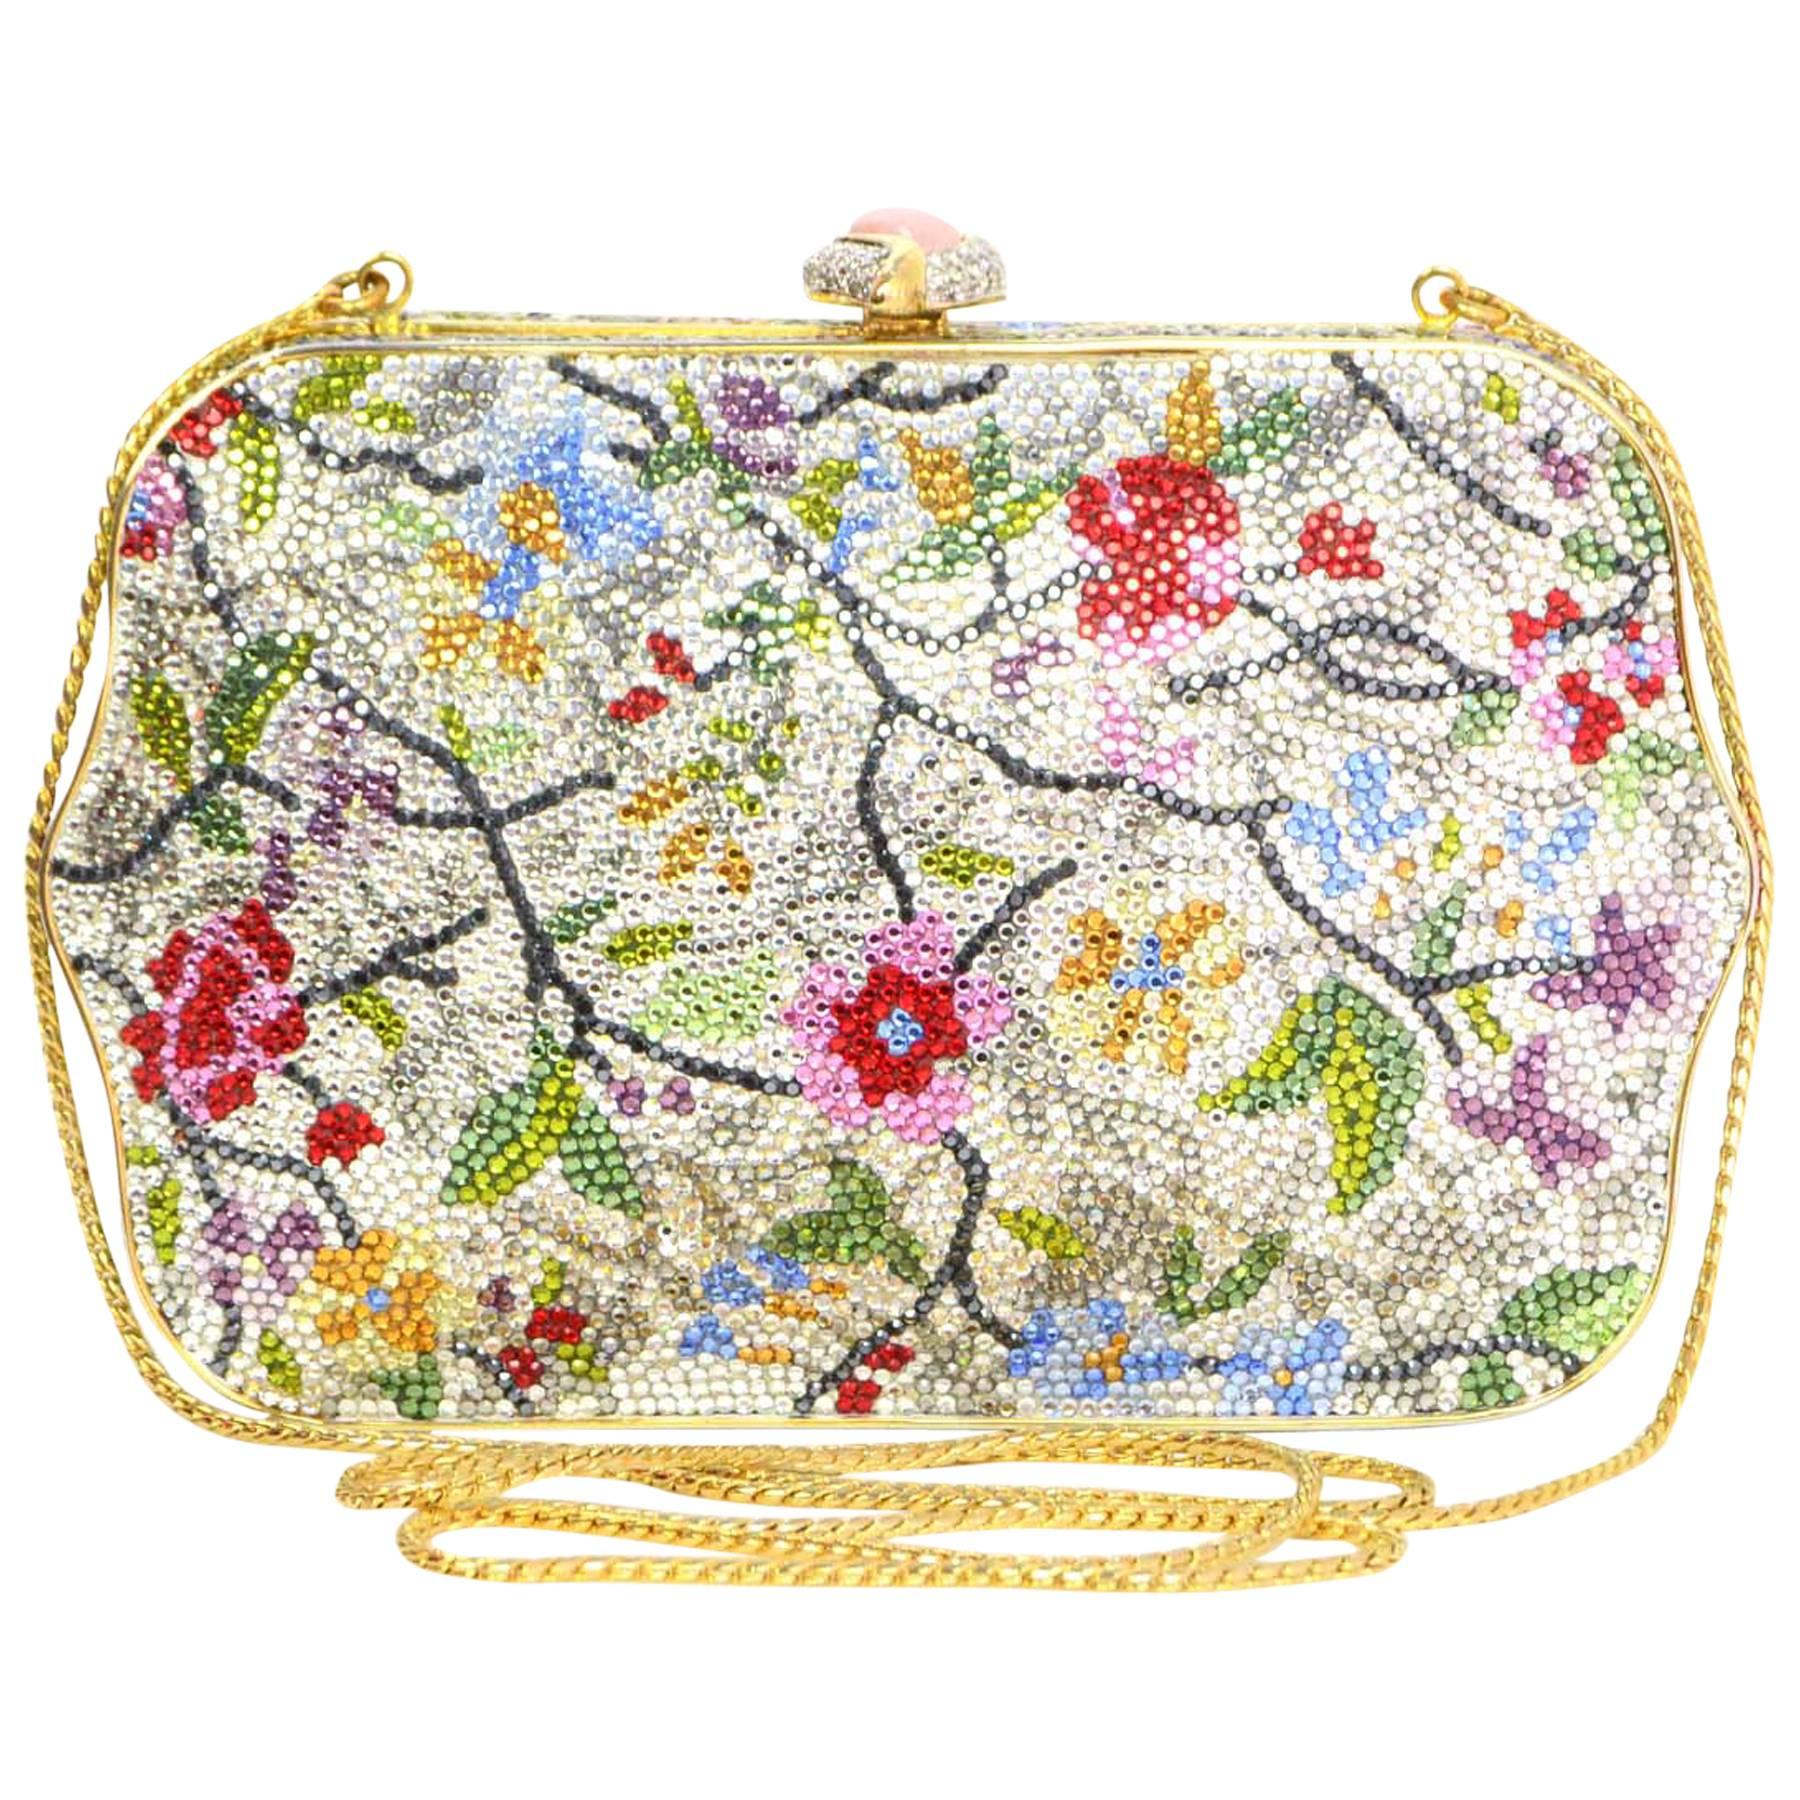 Judith Leiber Multi-Colored Floral Crystal Embellished Minaudiere GHW